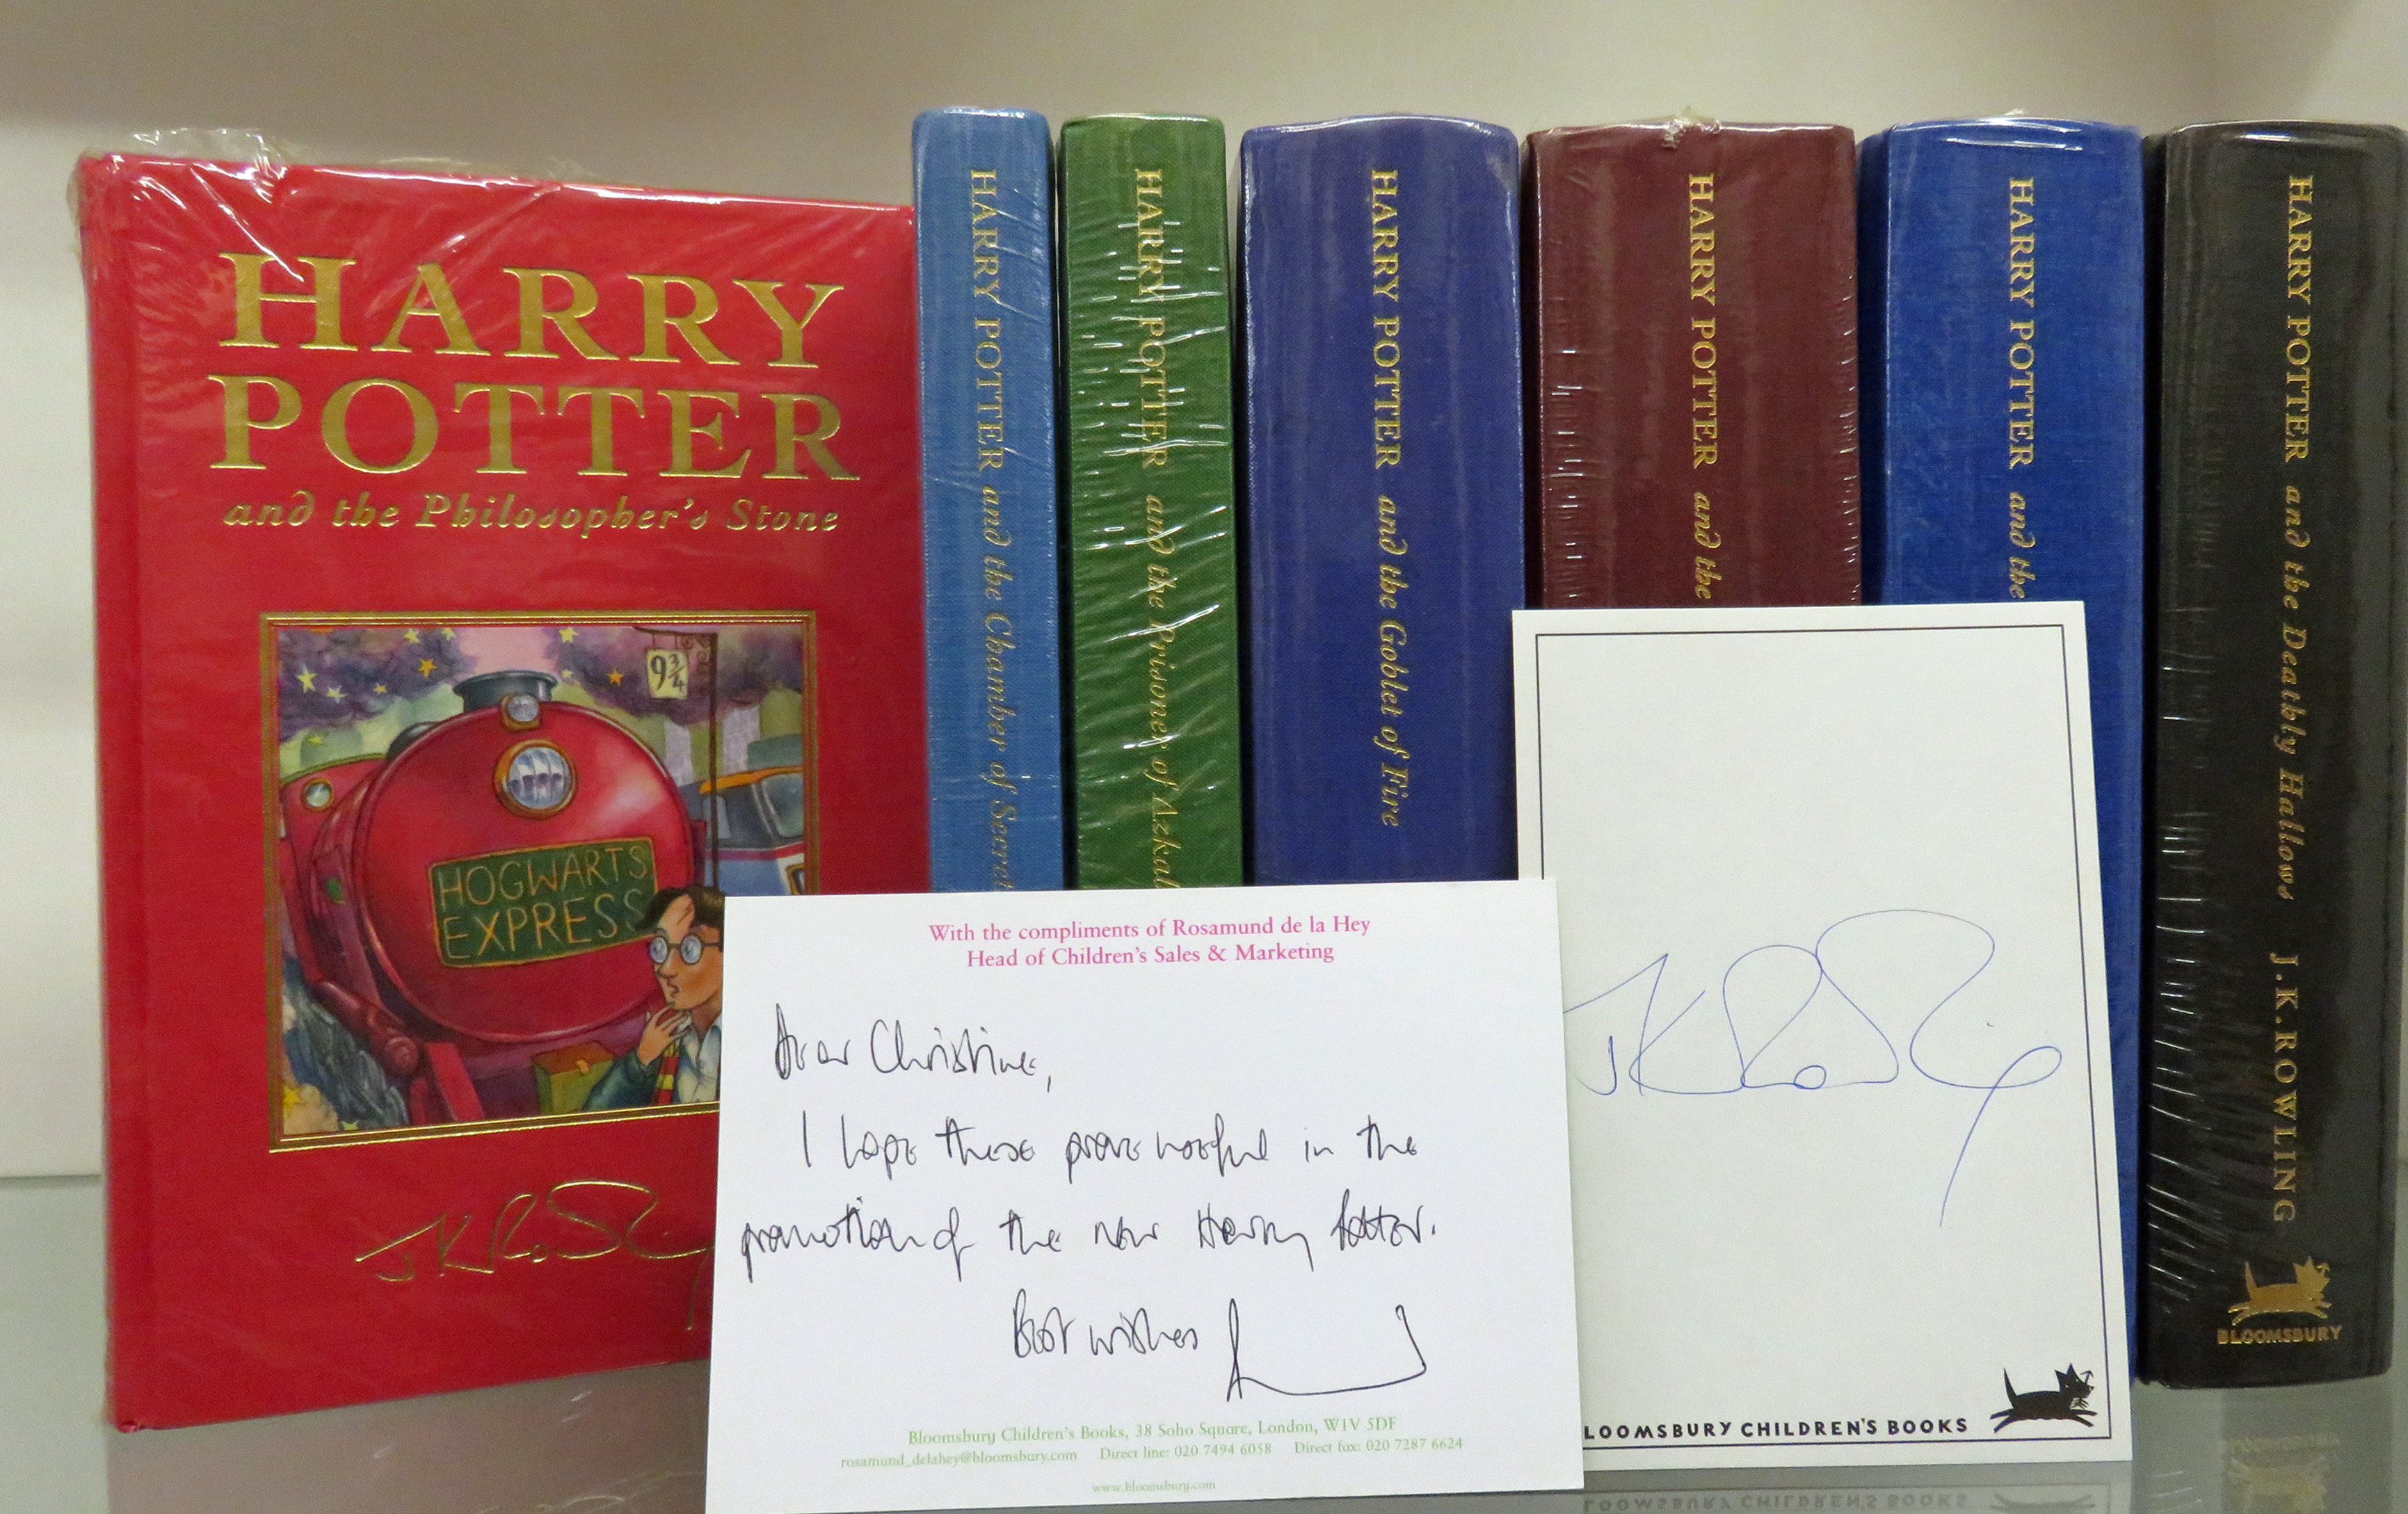 Harry Potter Deluxe Editions Including Philosopher's Stone Chamber of Secrets Prisoner of Azkaban Unopened Signed 7 Times. 